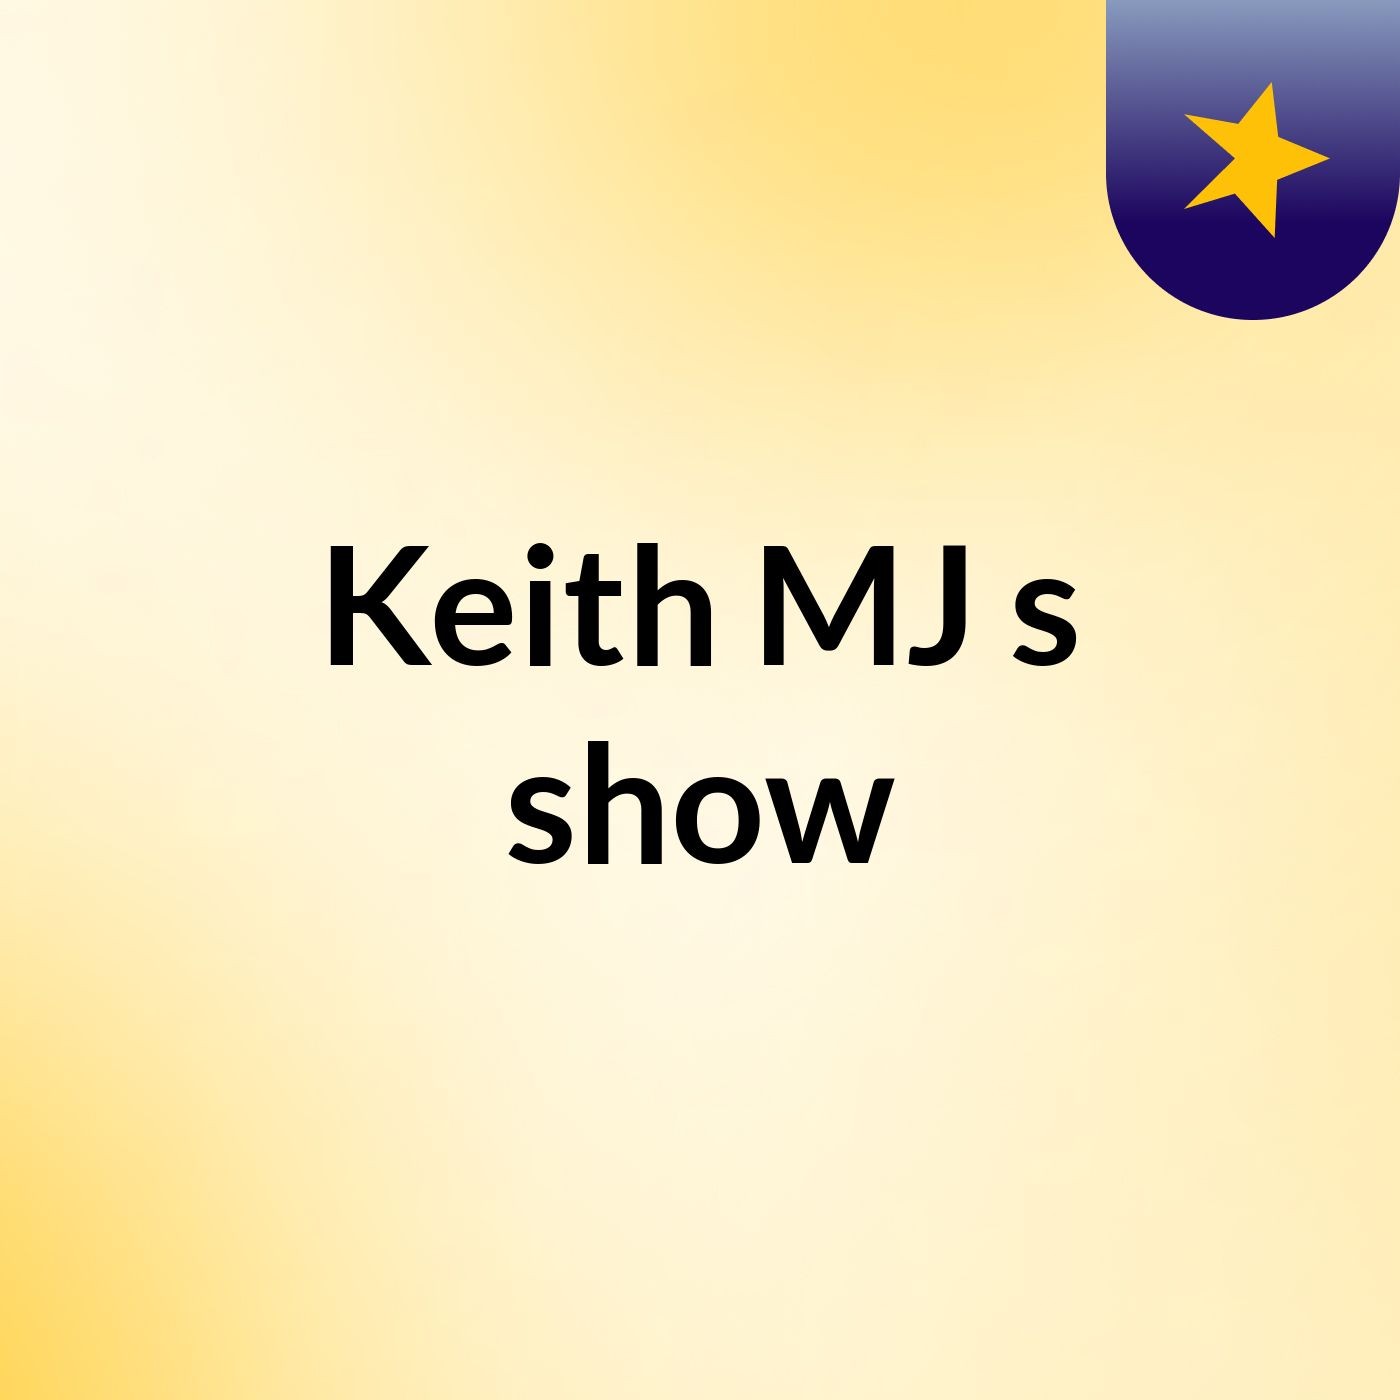 Keith MJ's show